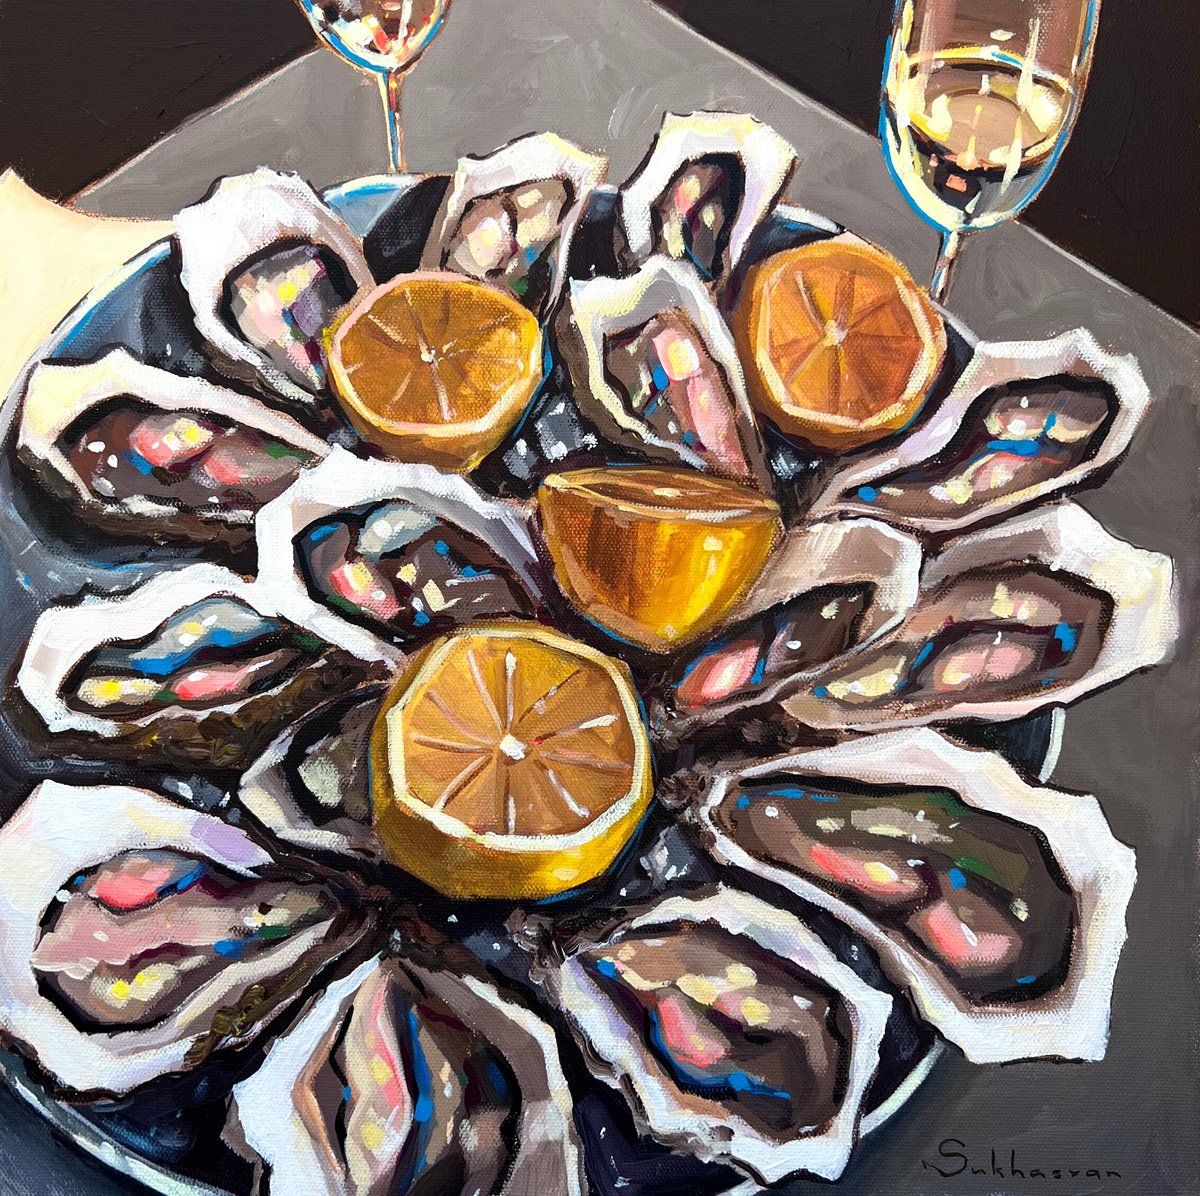 Still Life with Oysters, Wine and Lemons by Victoria Sukhasyan